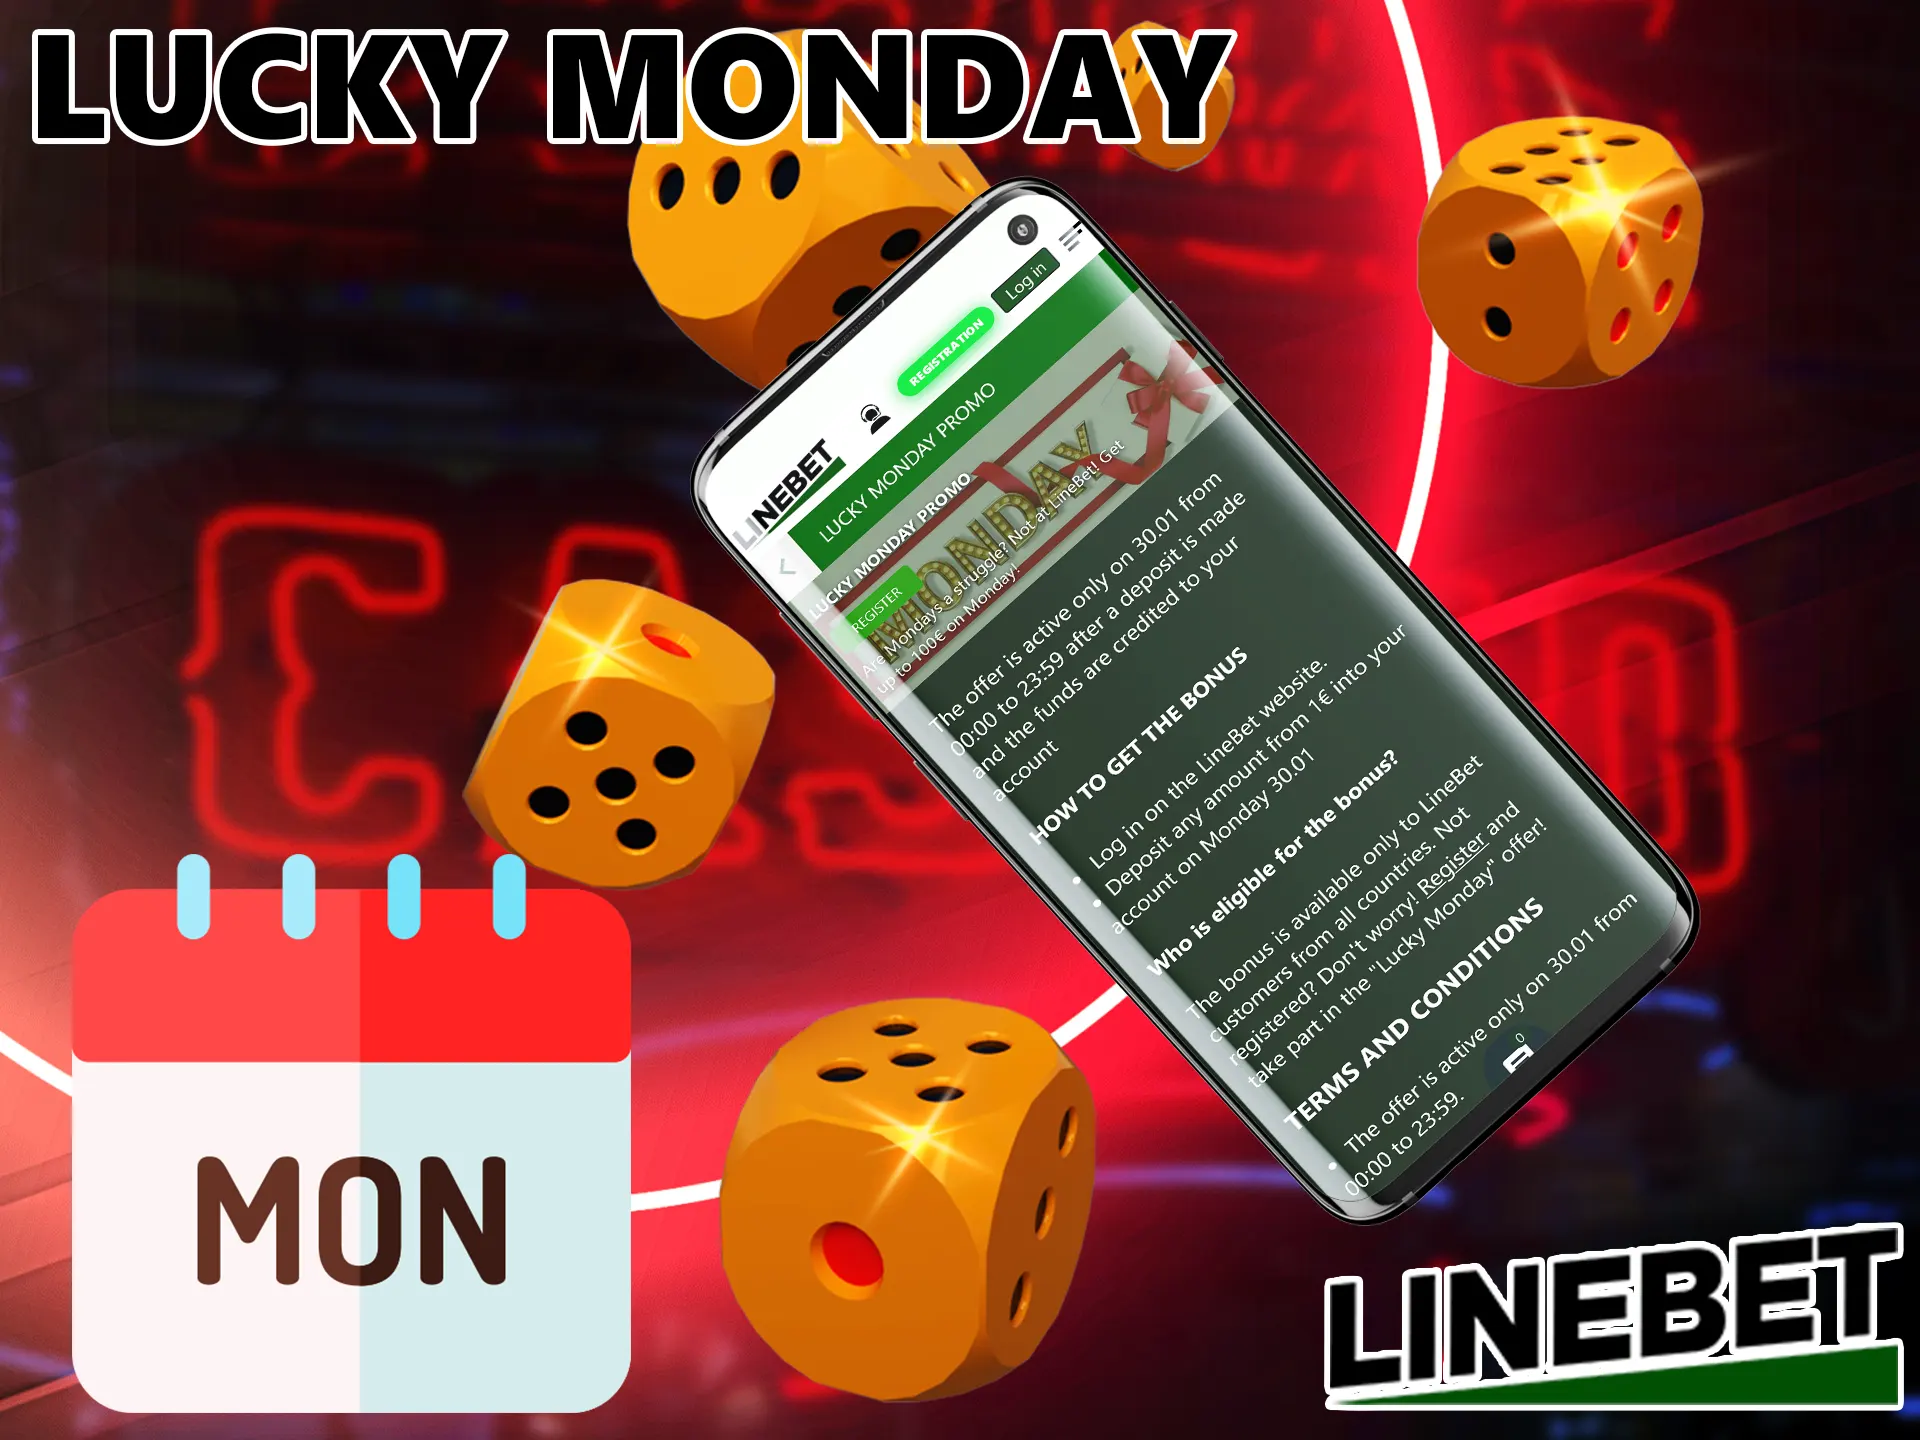 At the start of the week you can double your deposit, just try out the Linebet Monday bonus as well as other Linebet promotions.